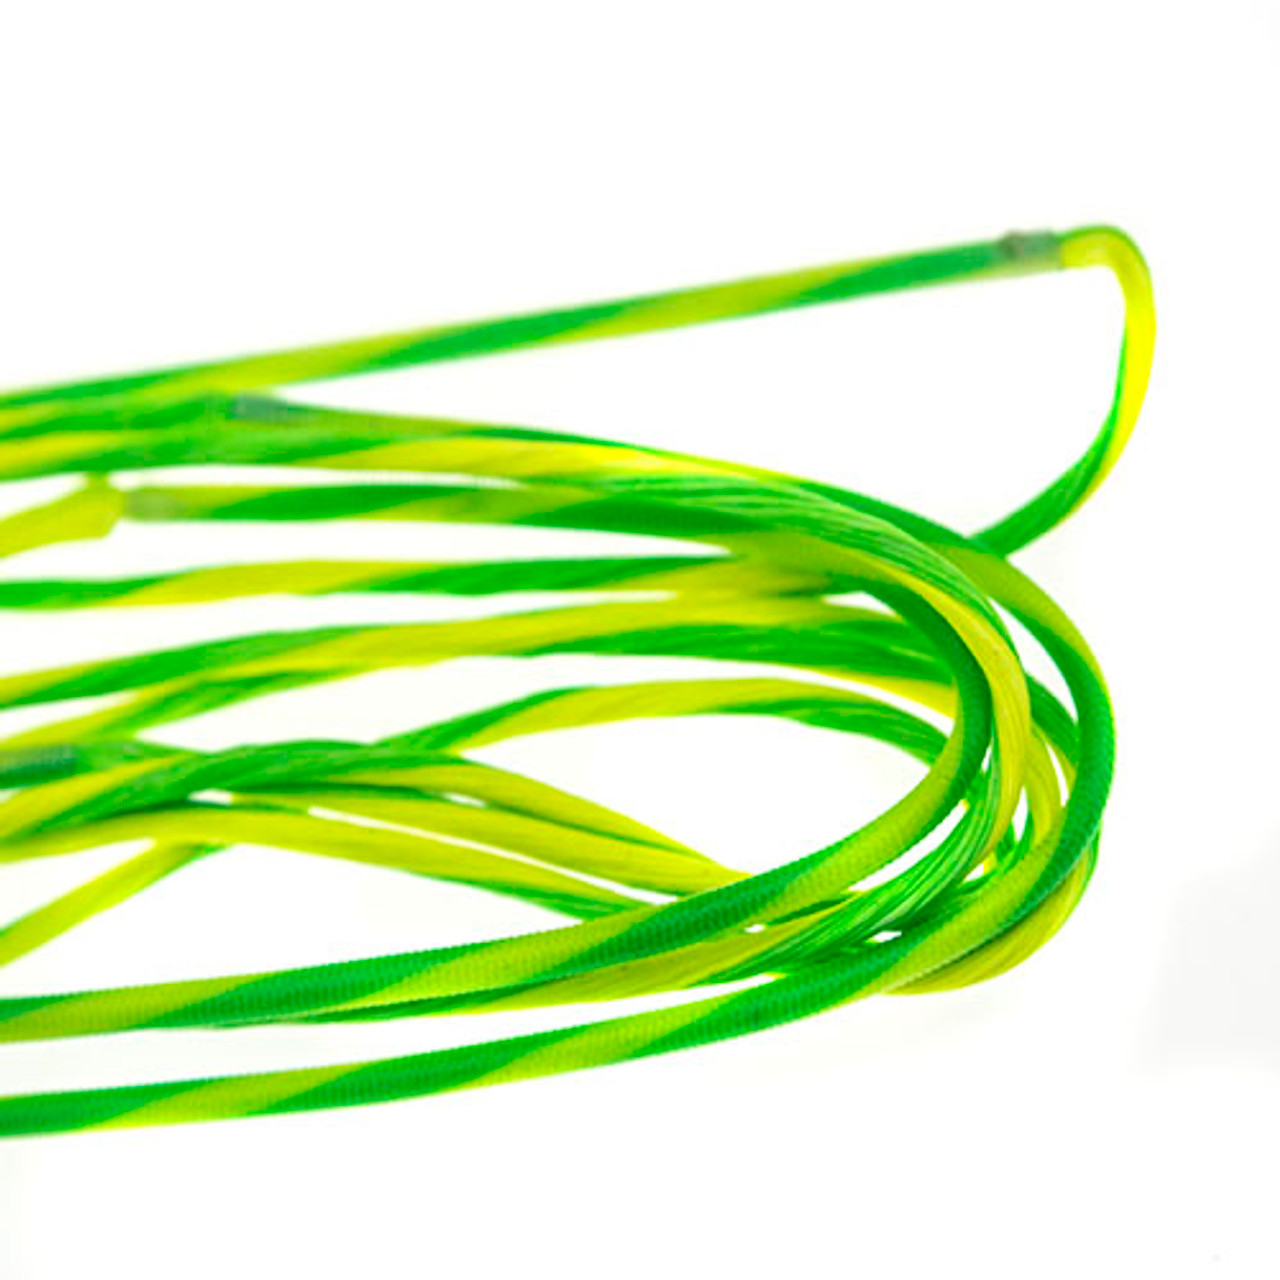 custom compound bow string in green and yellow